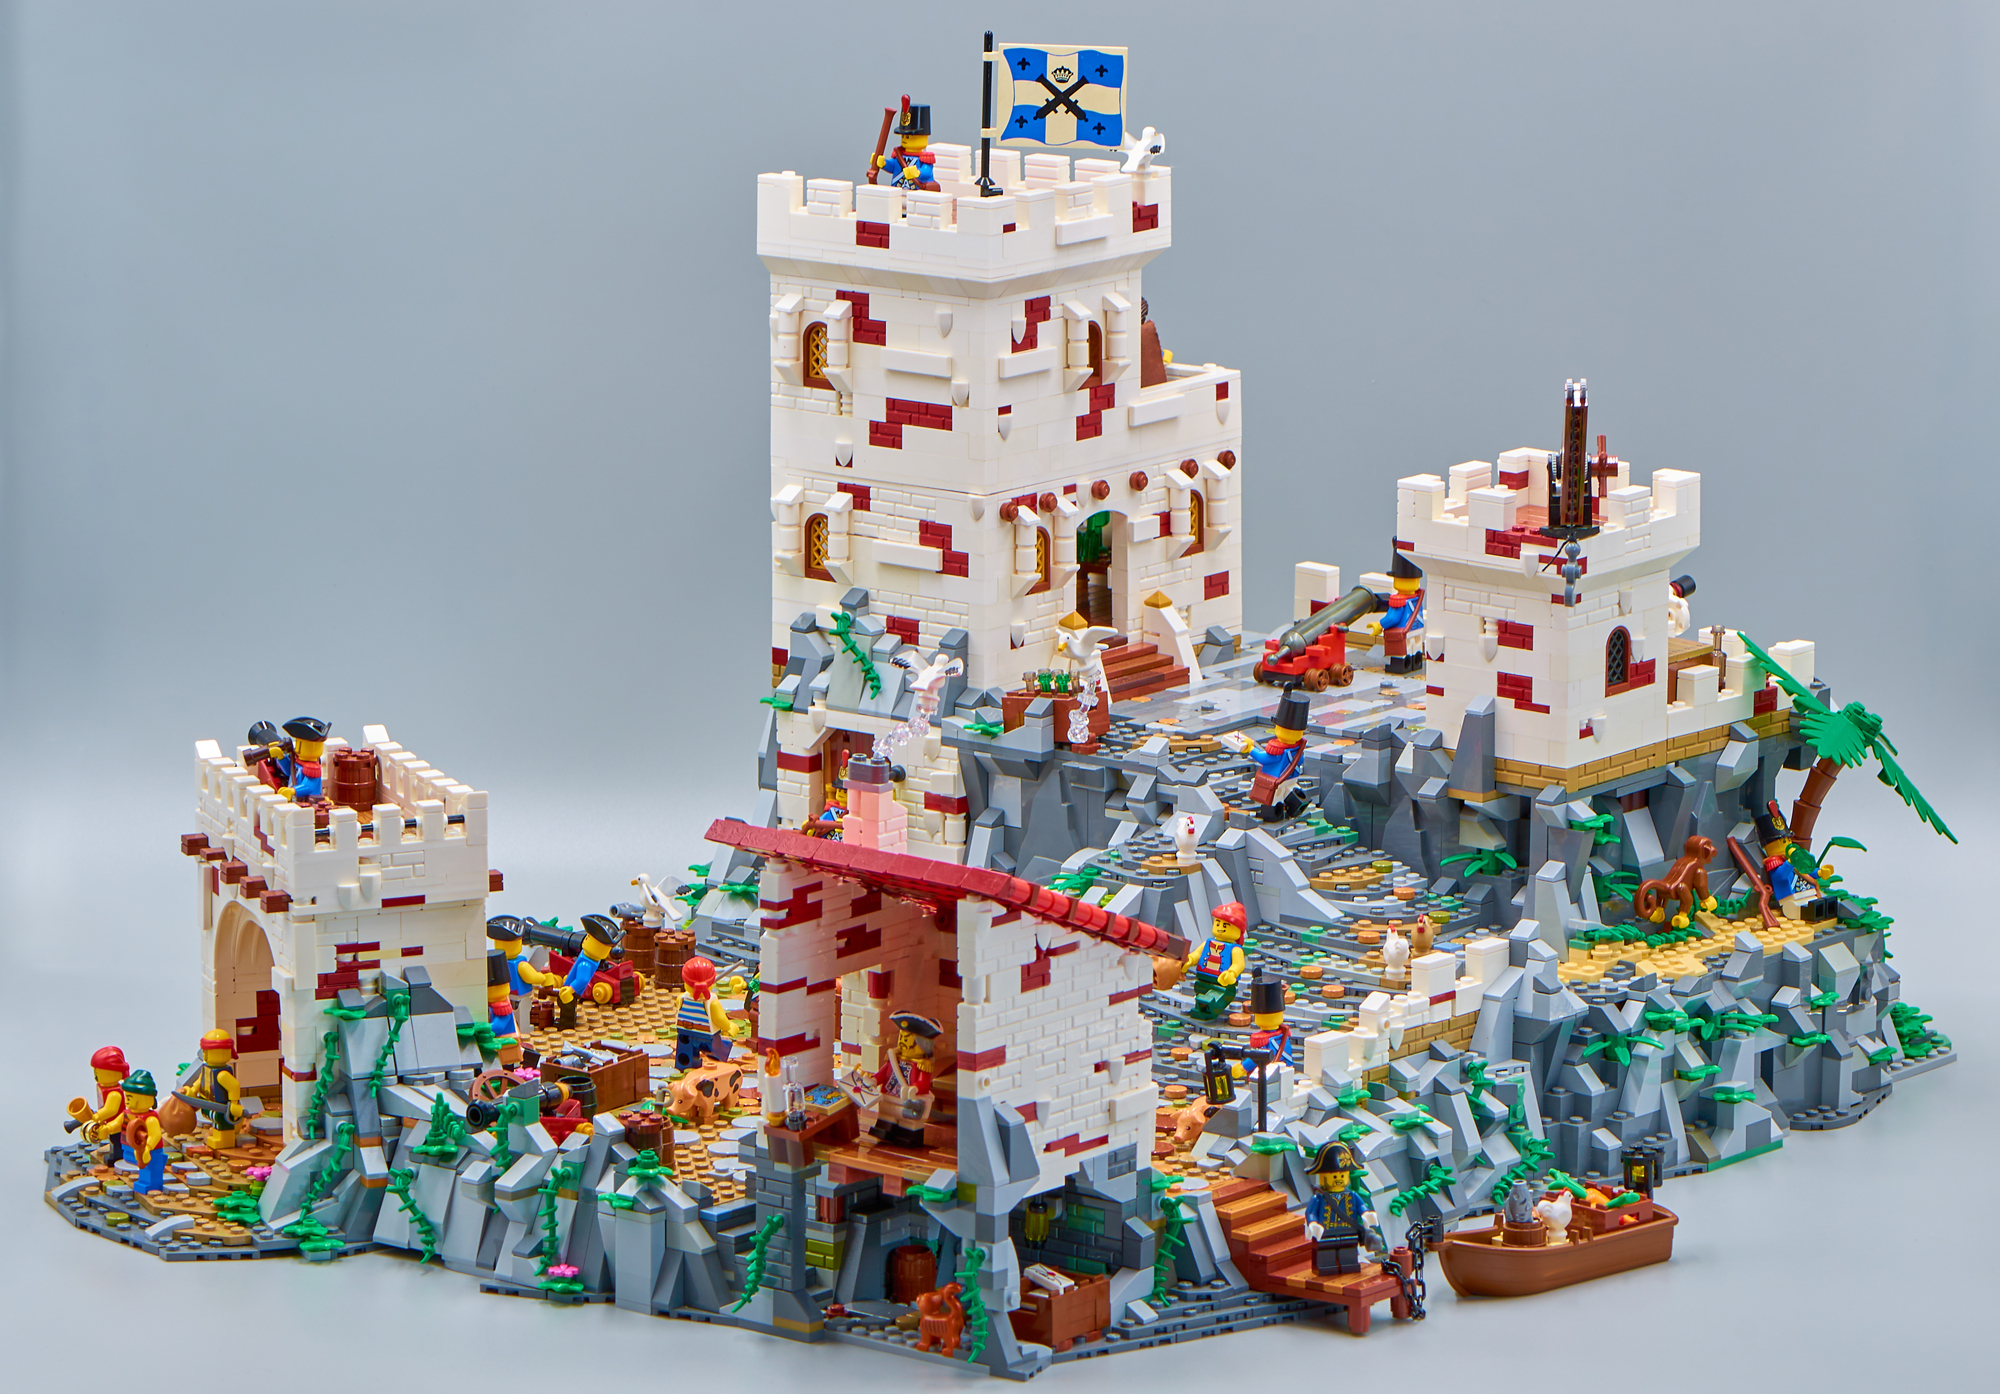 The Fortress V.2.0” by Piraten – MOCs – News and MOCs